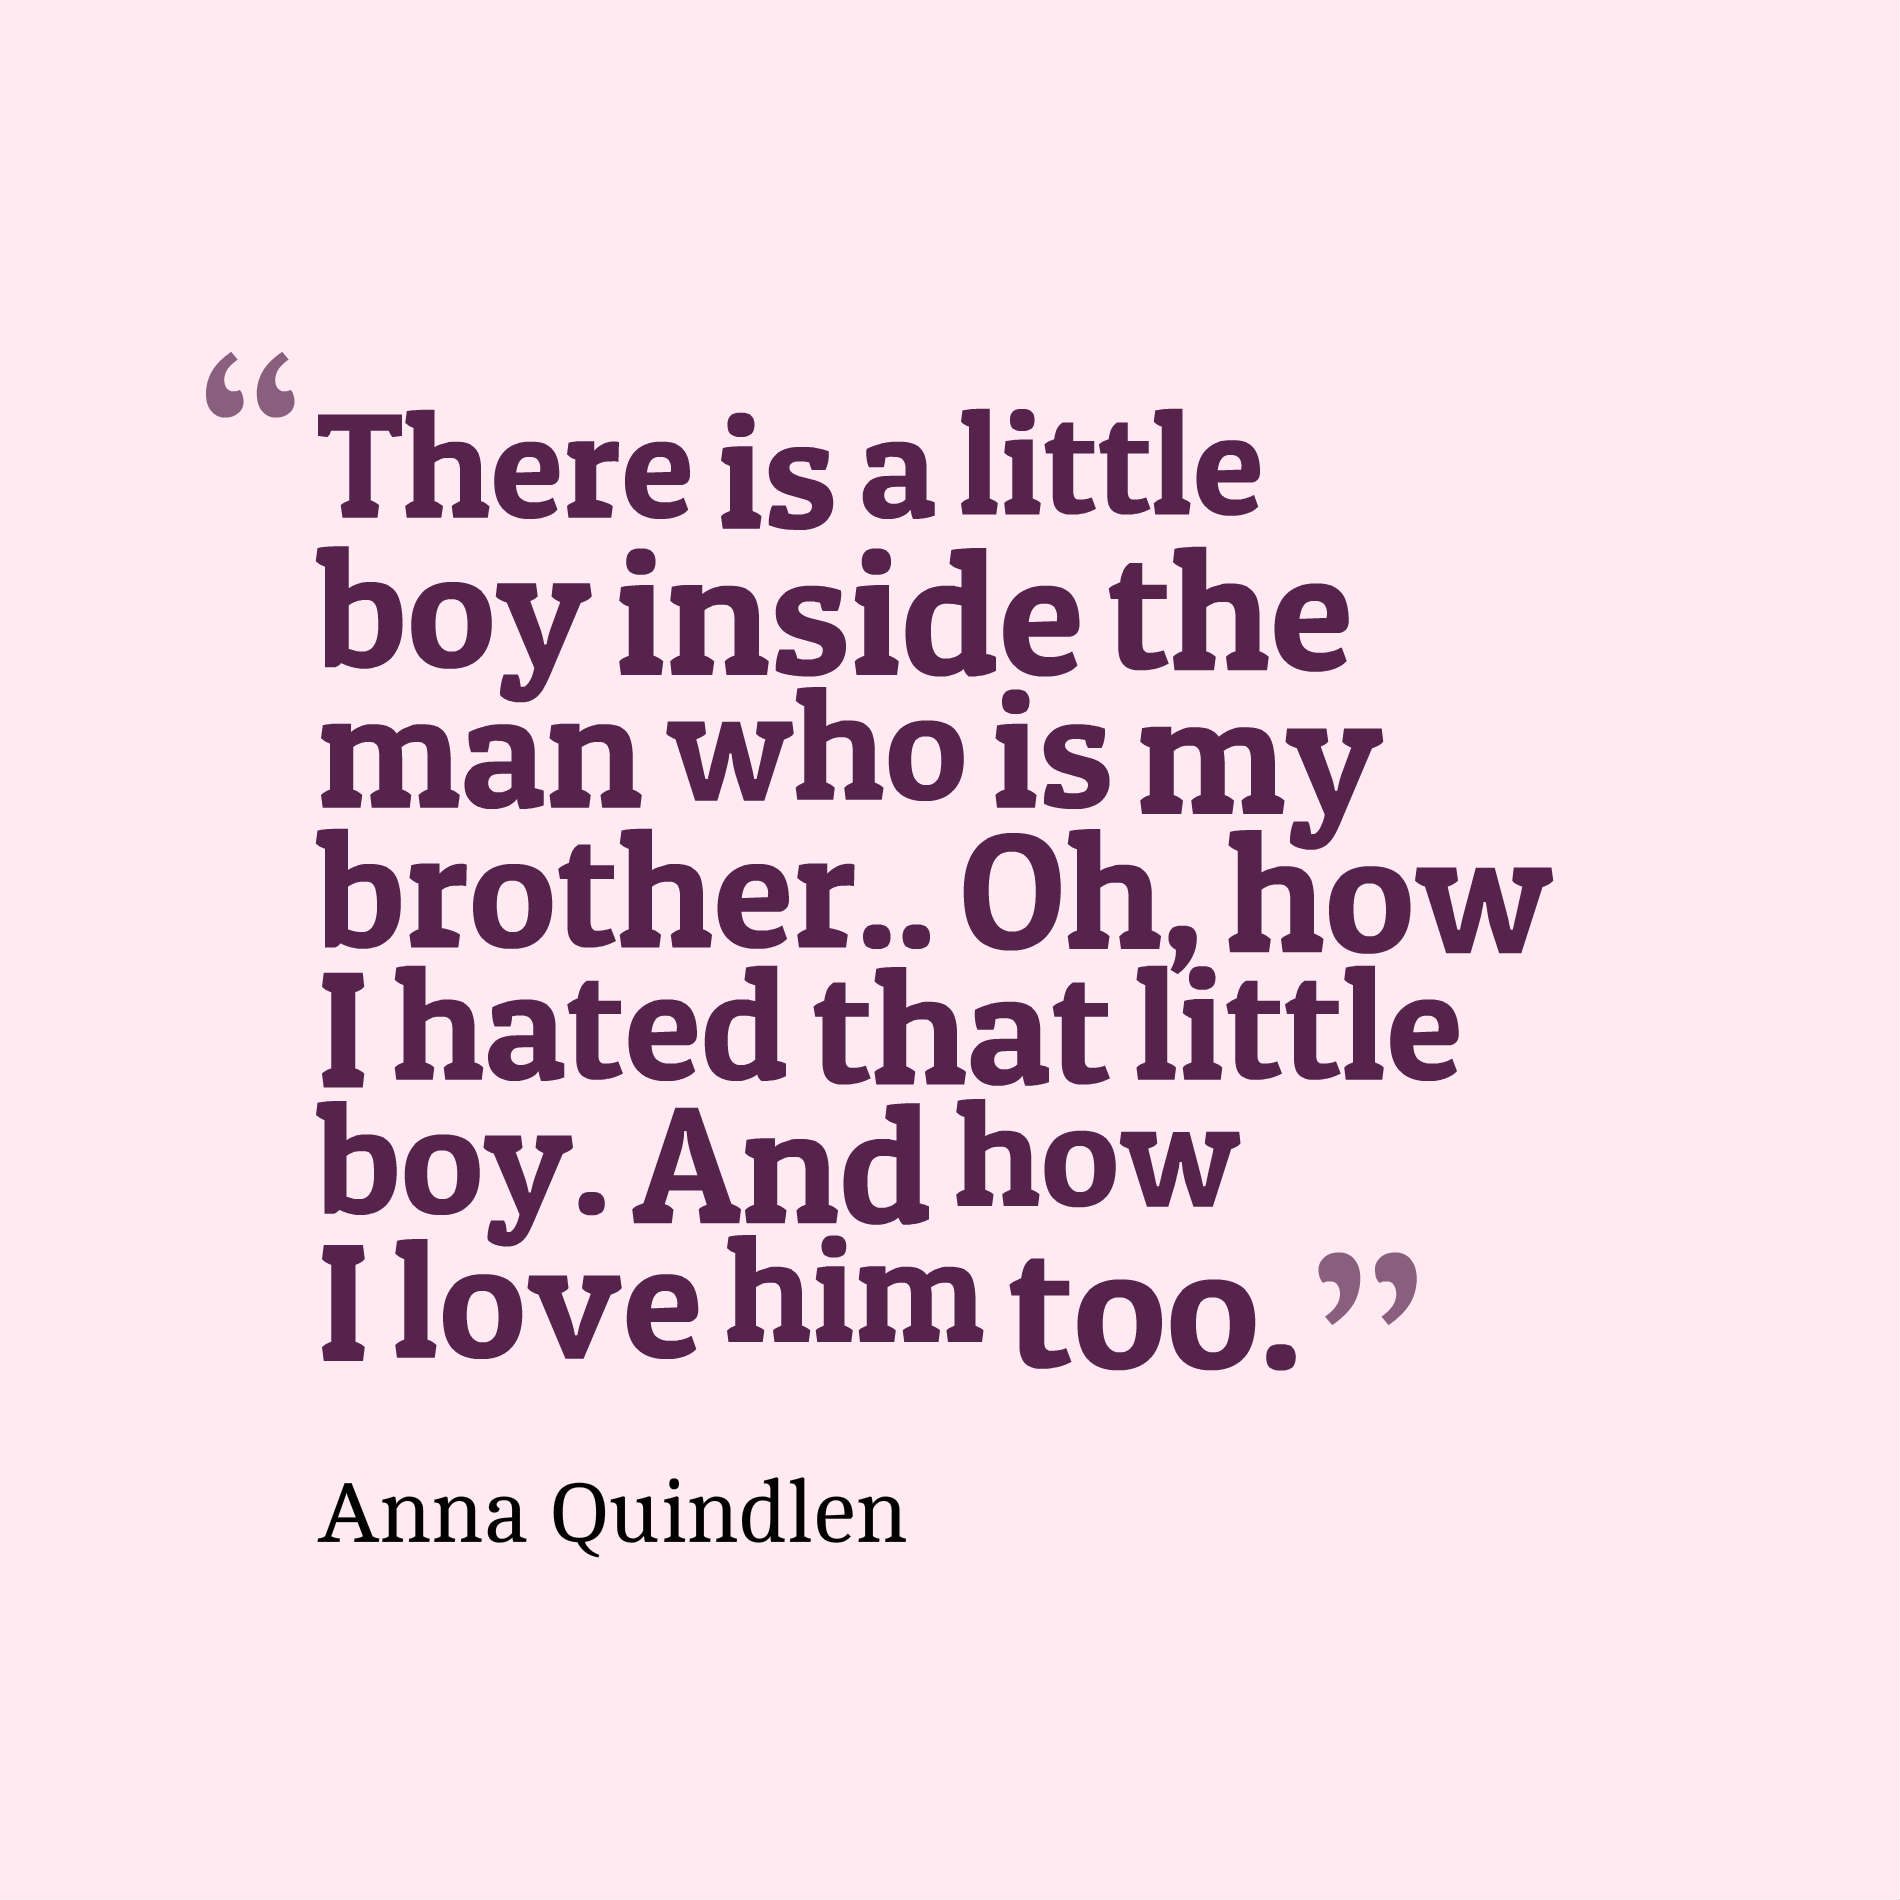 There is a little boy inside the man who is my brother.. Oh, how I hated that little boy. And how I love him too.